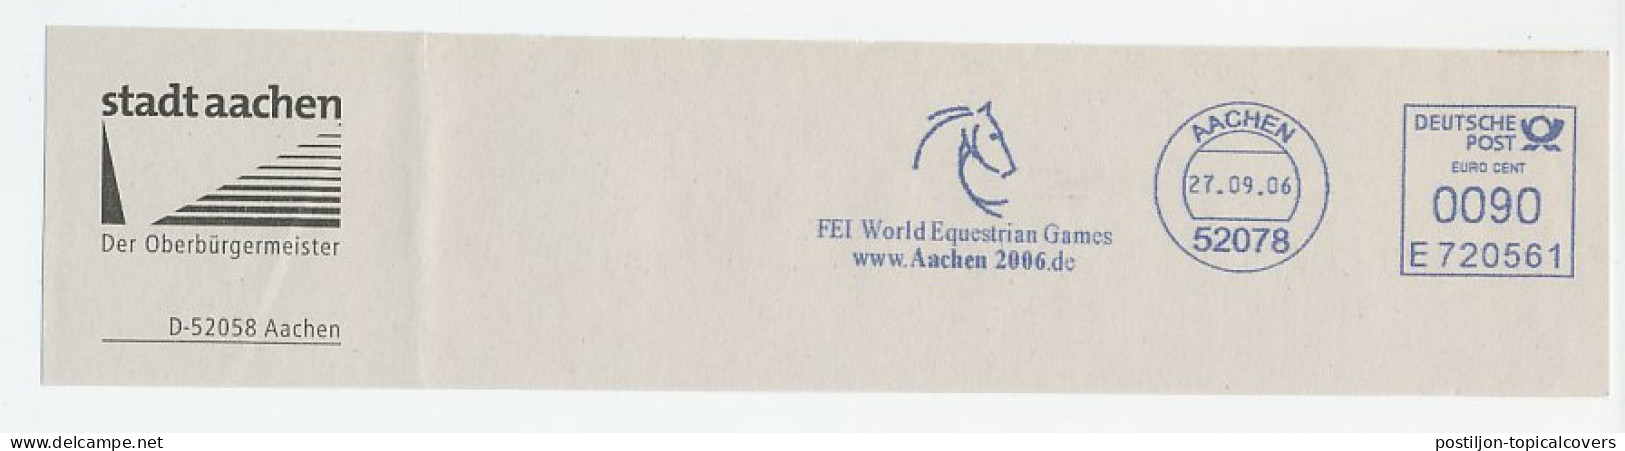 Meter Top Cut Germany 2006 FEI - World Equestrian Games  - Ippica